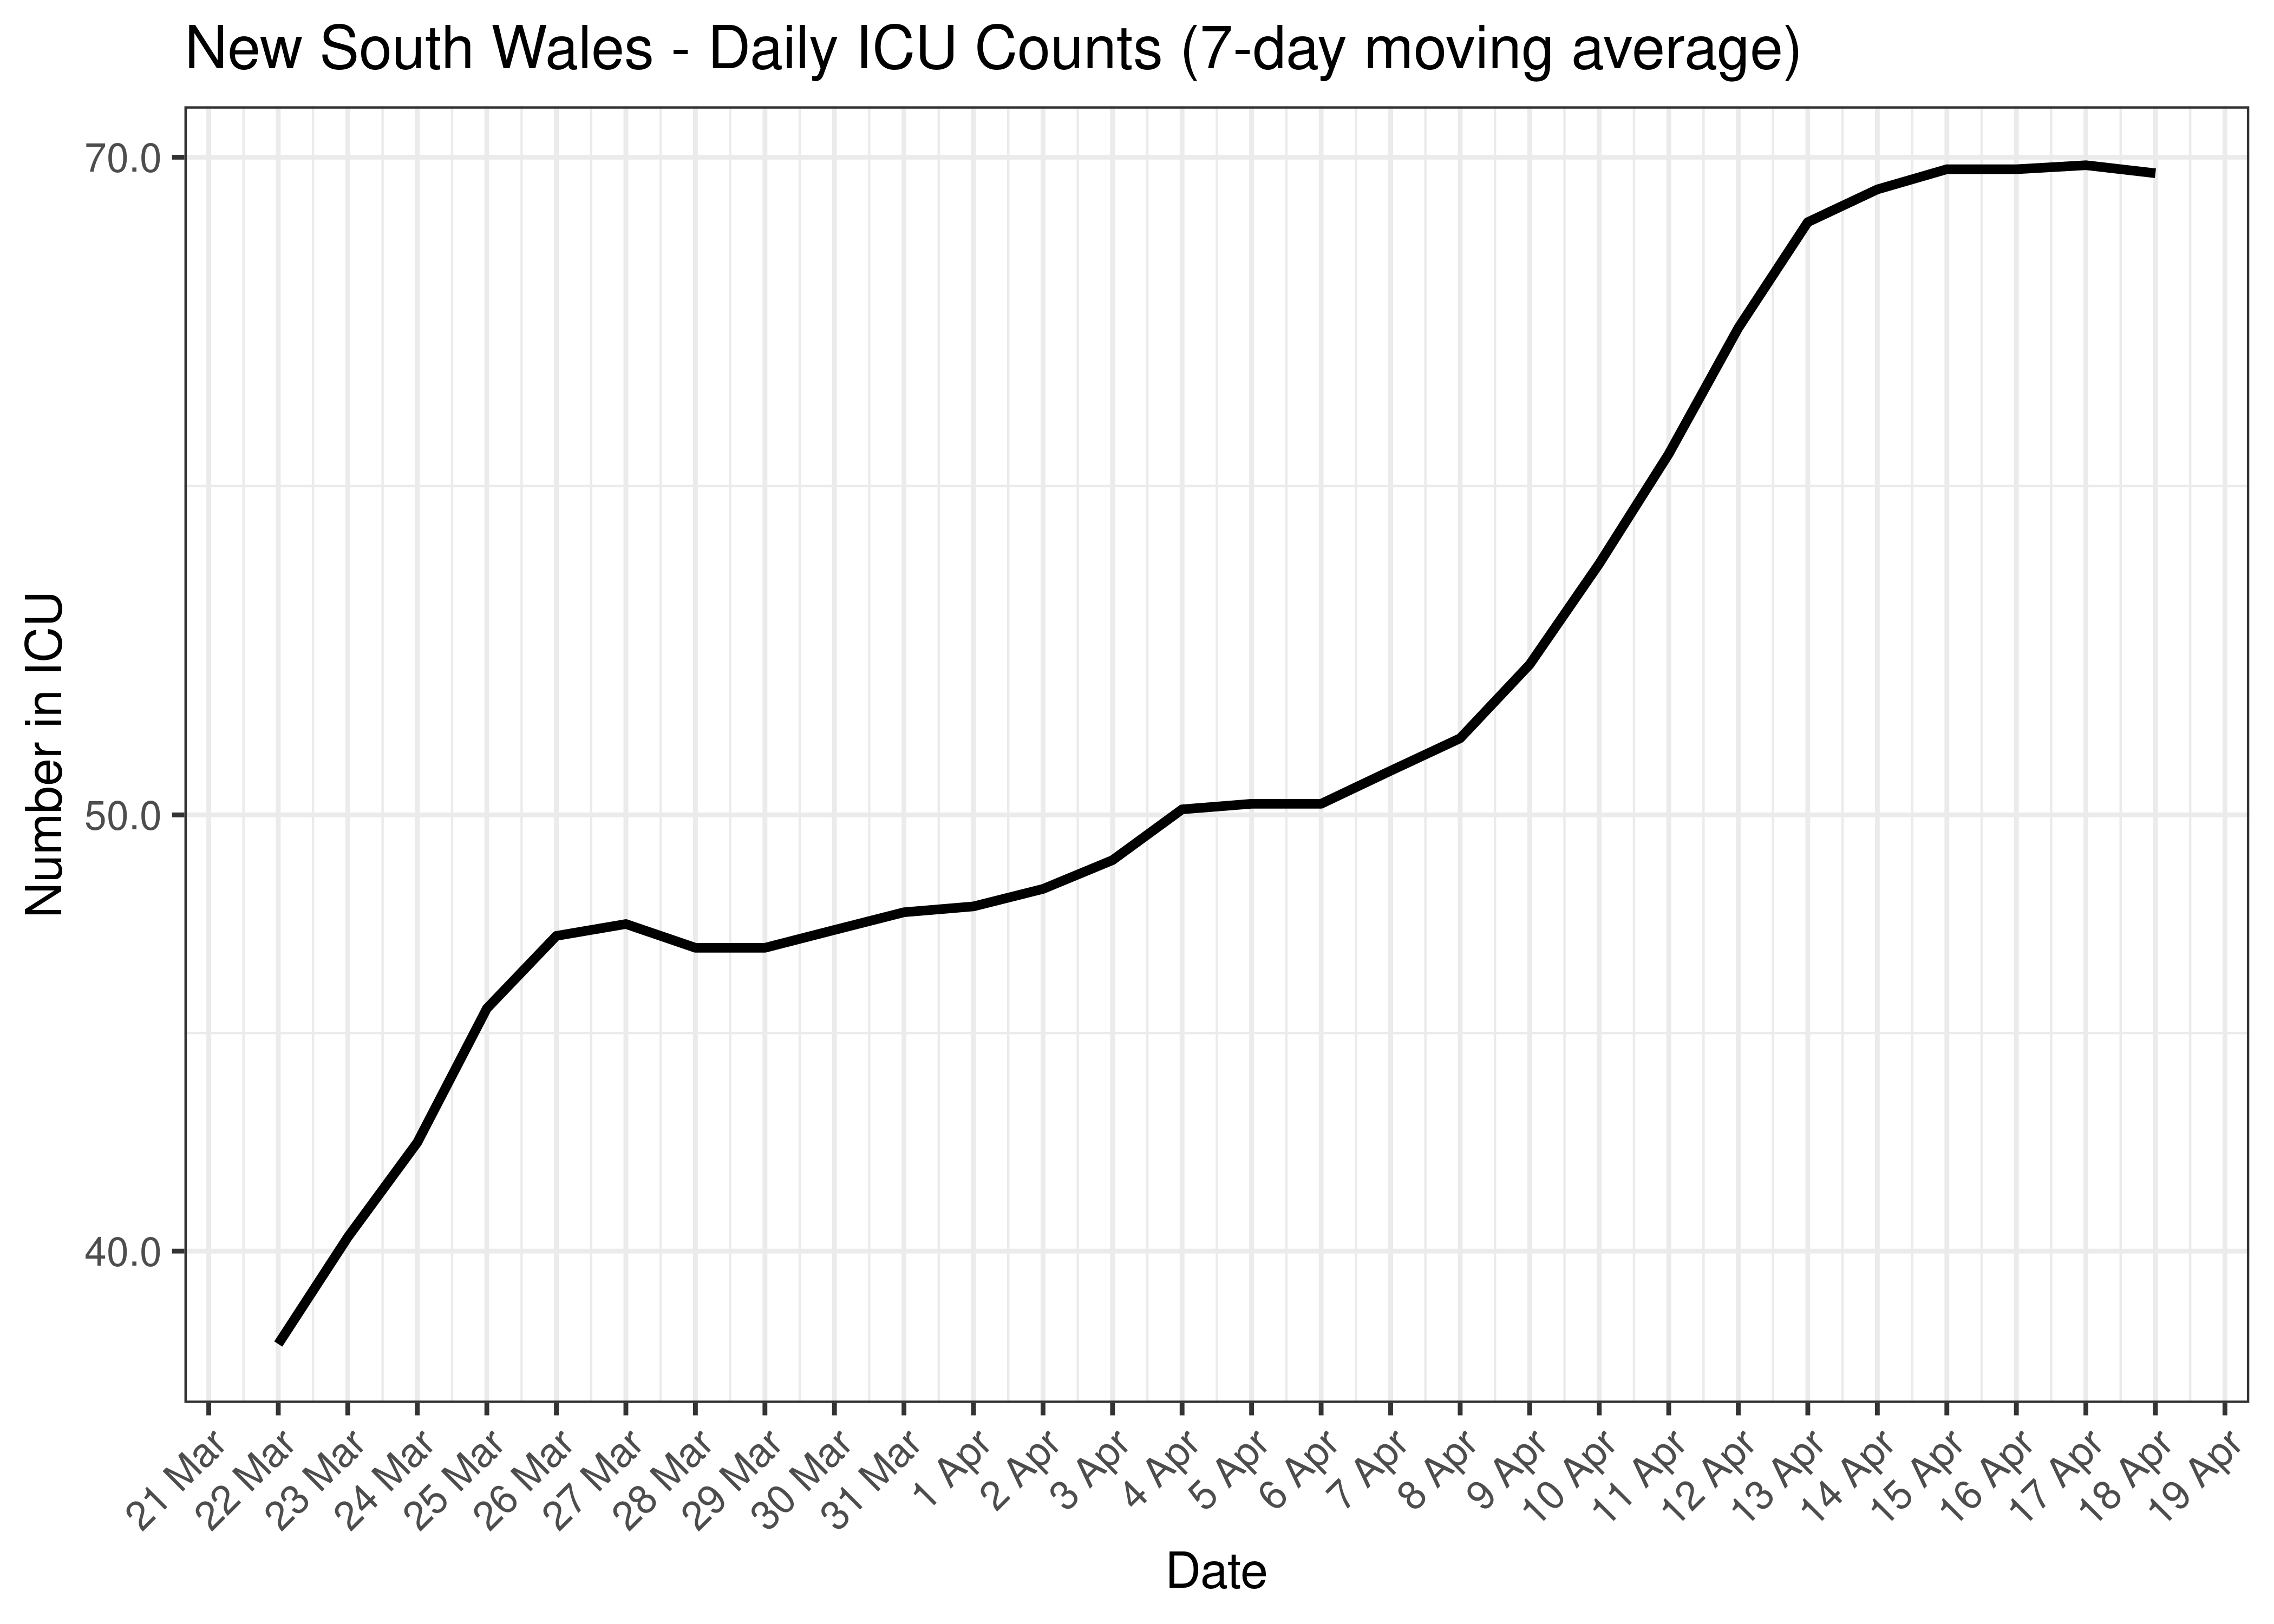 New South Wales - Daily ICU Counts for Last 30-days (7-day moving average)